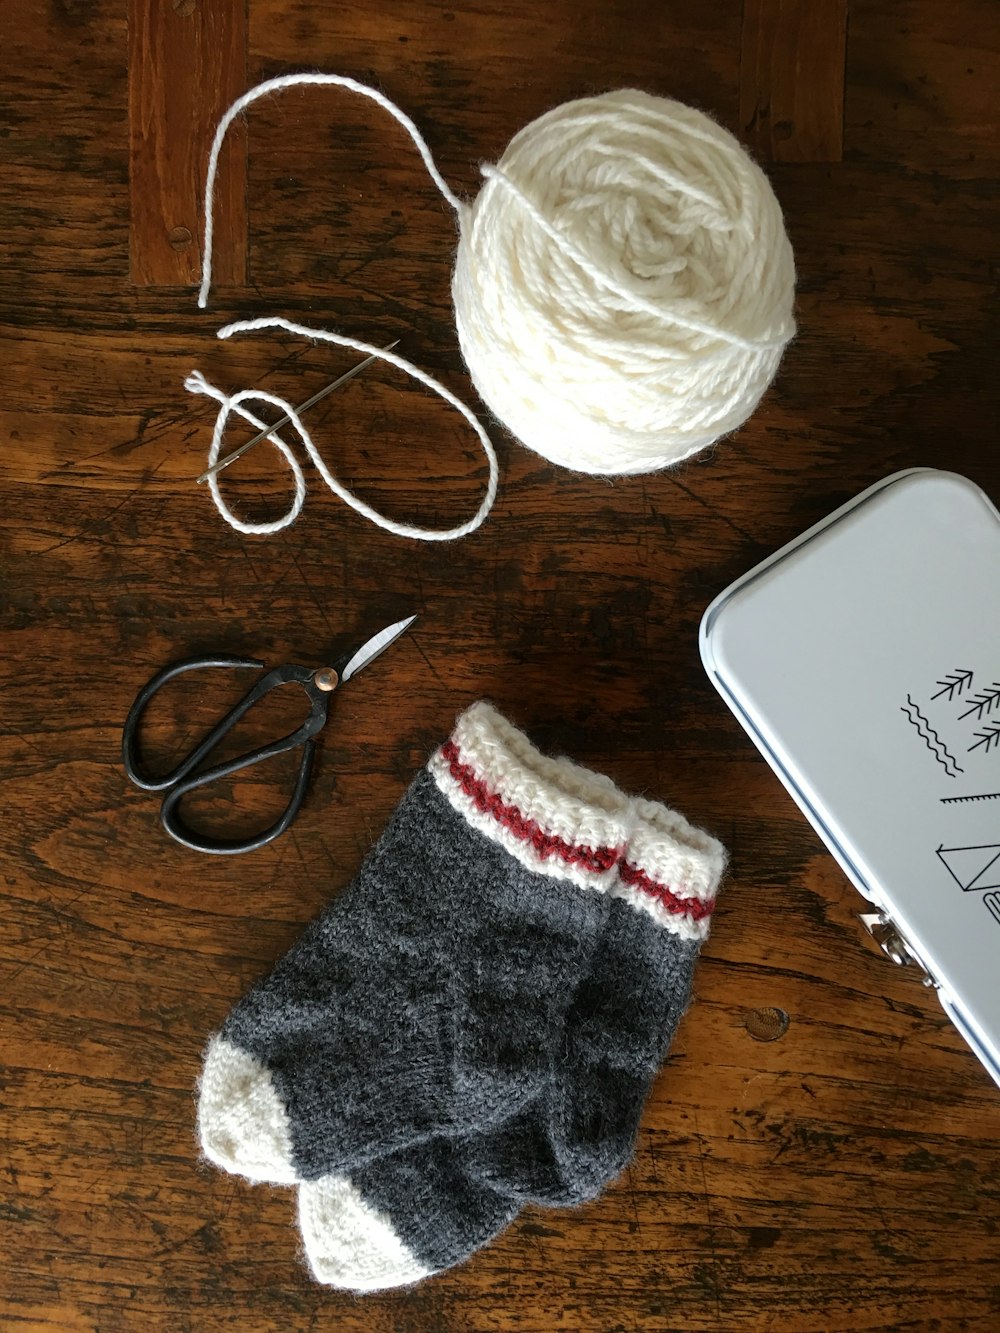 a pair of scissors, a ball of yarn, and a pair of mitts